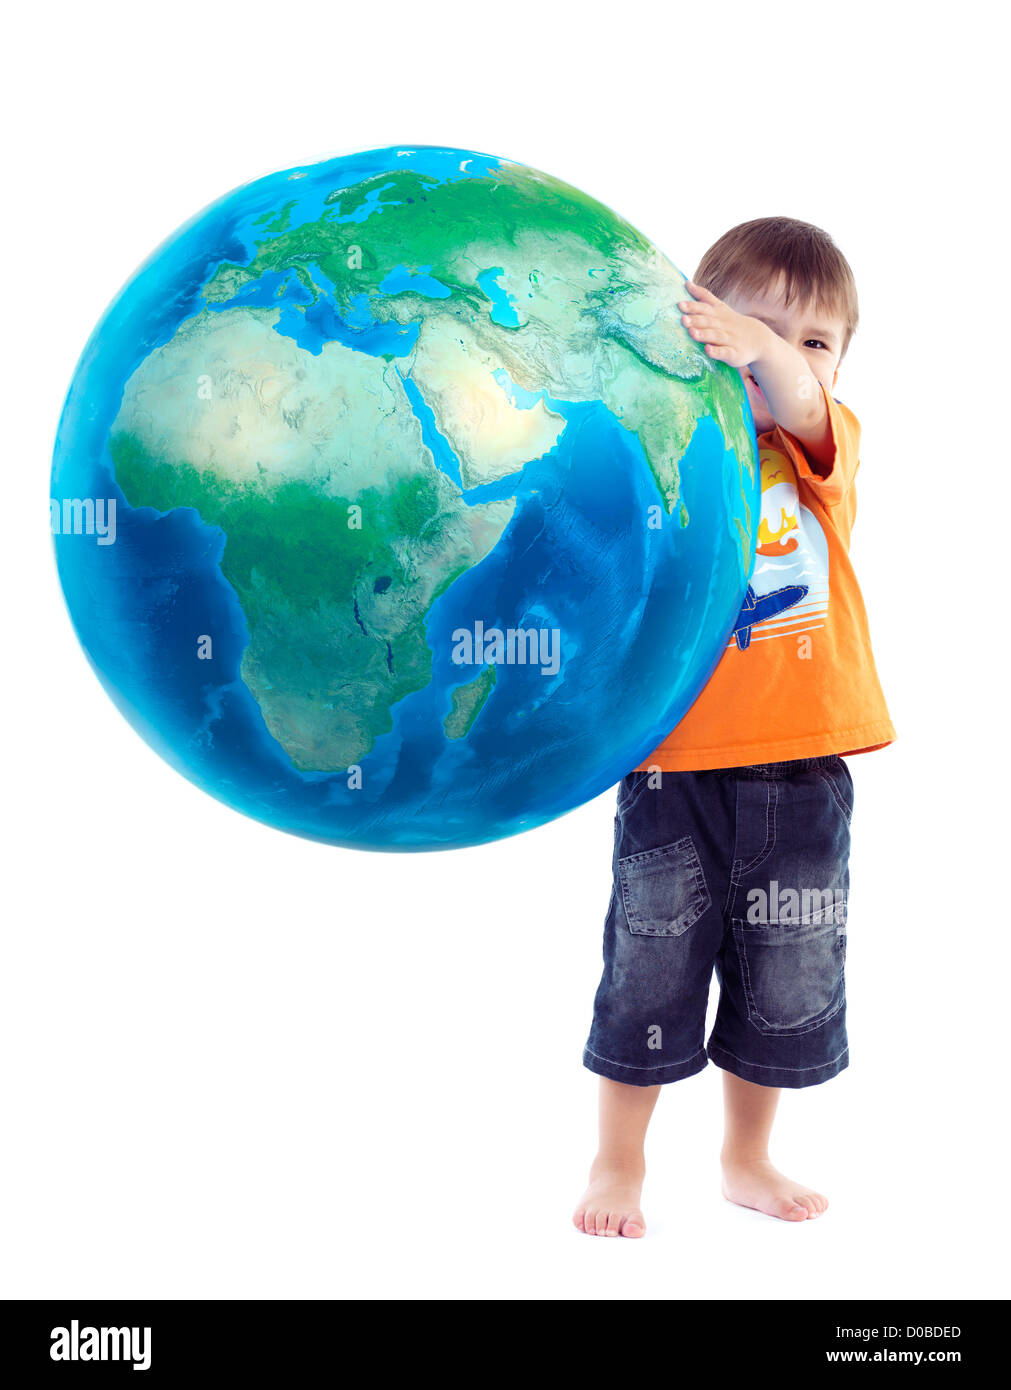 Cute little boy holding world globe, blue planet Earth in his hands, conceptual photo isolated on white background. Stock Photo